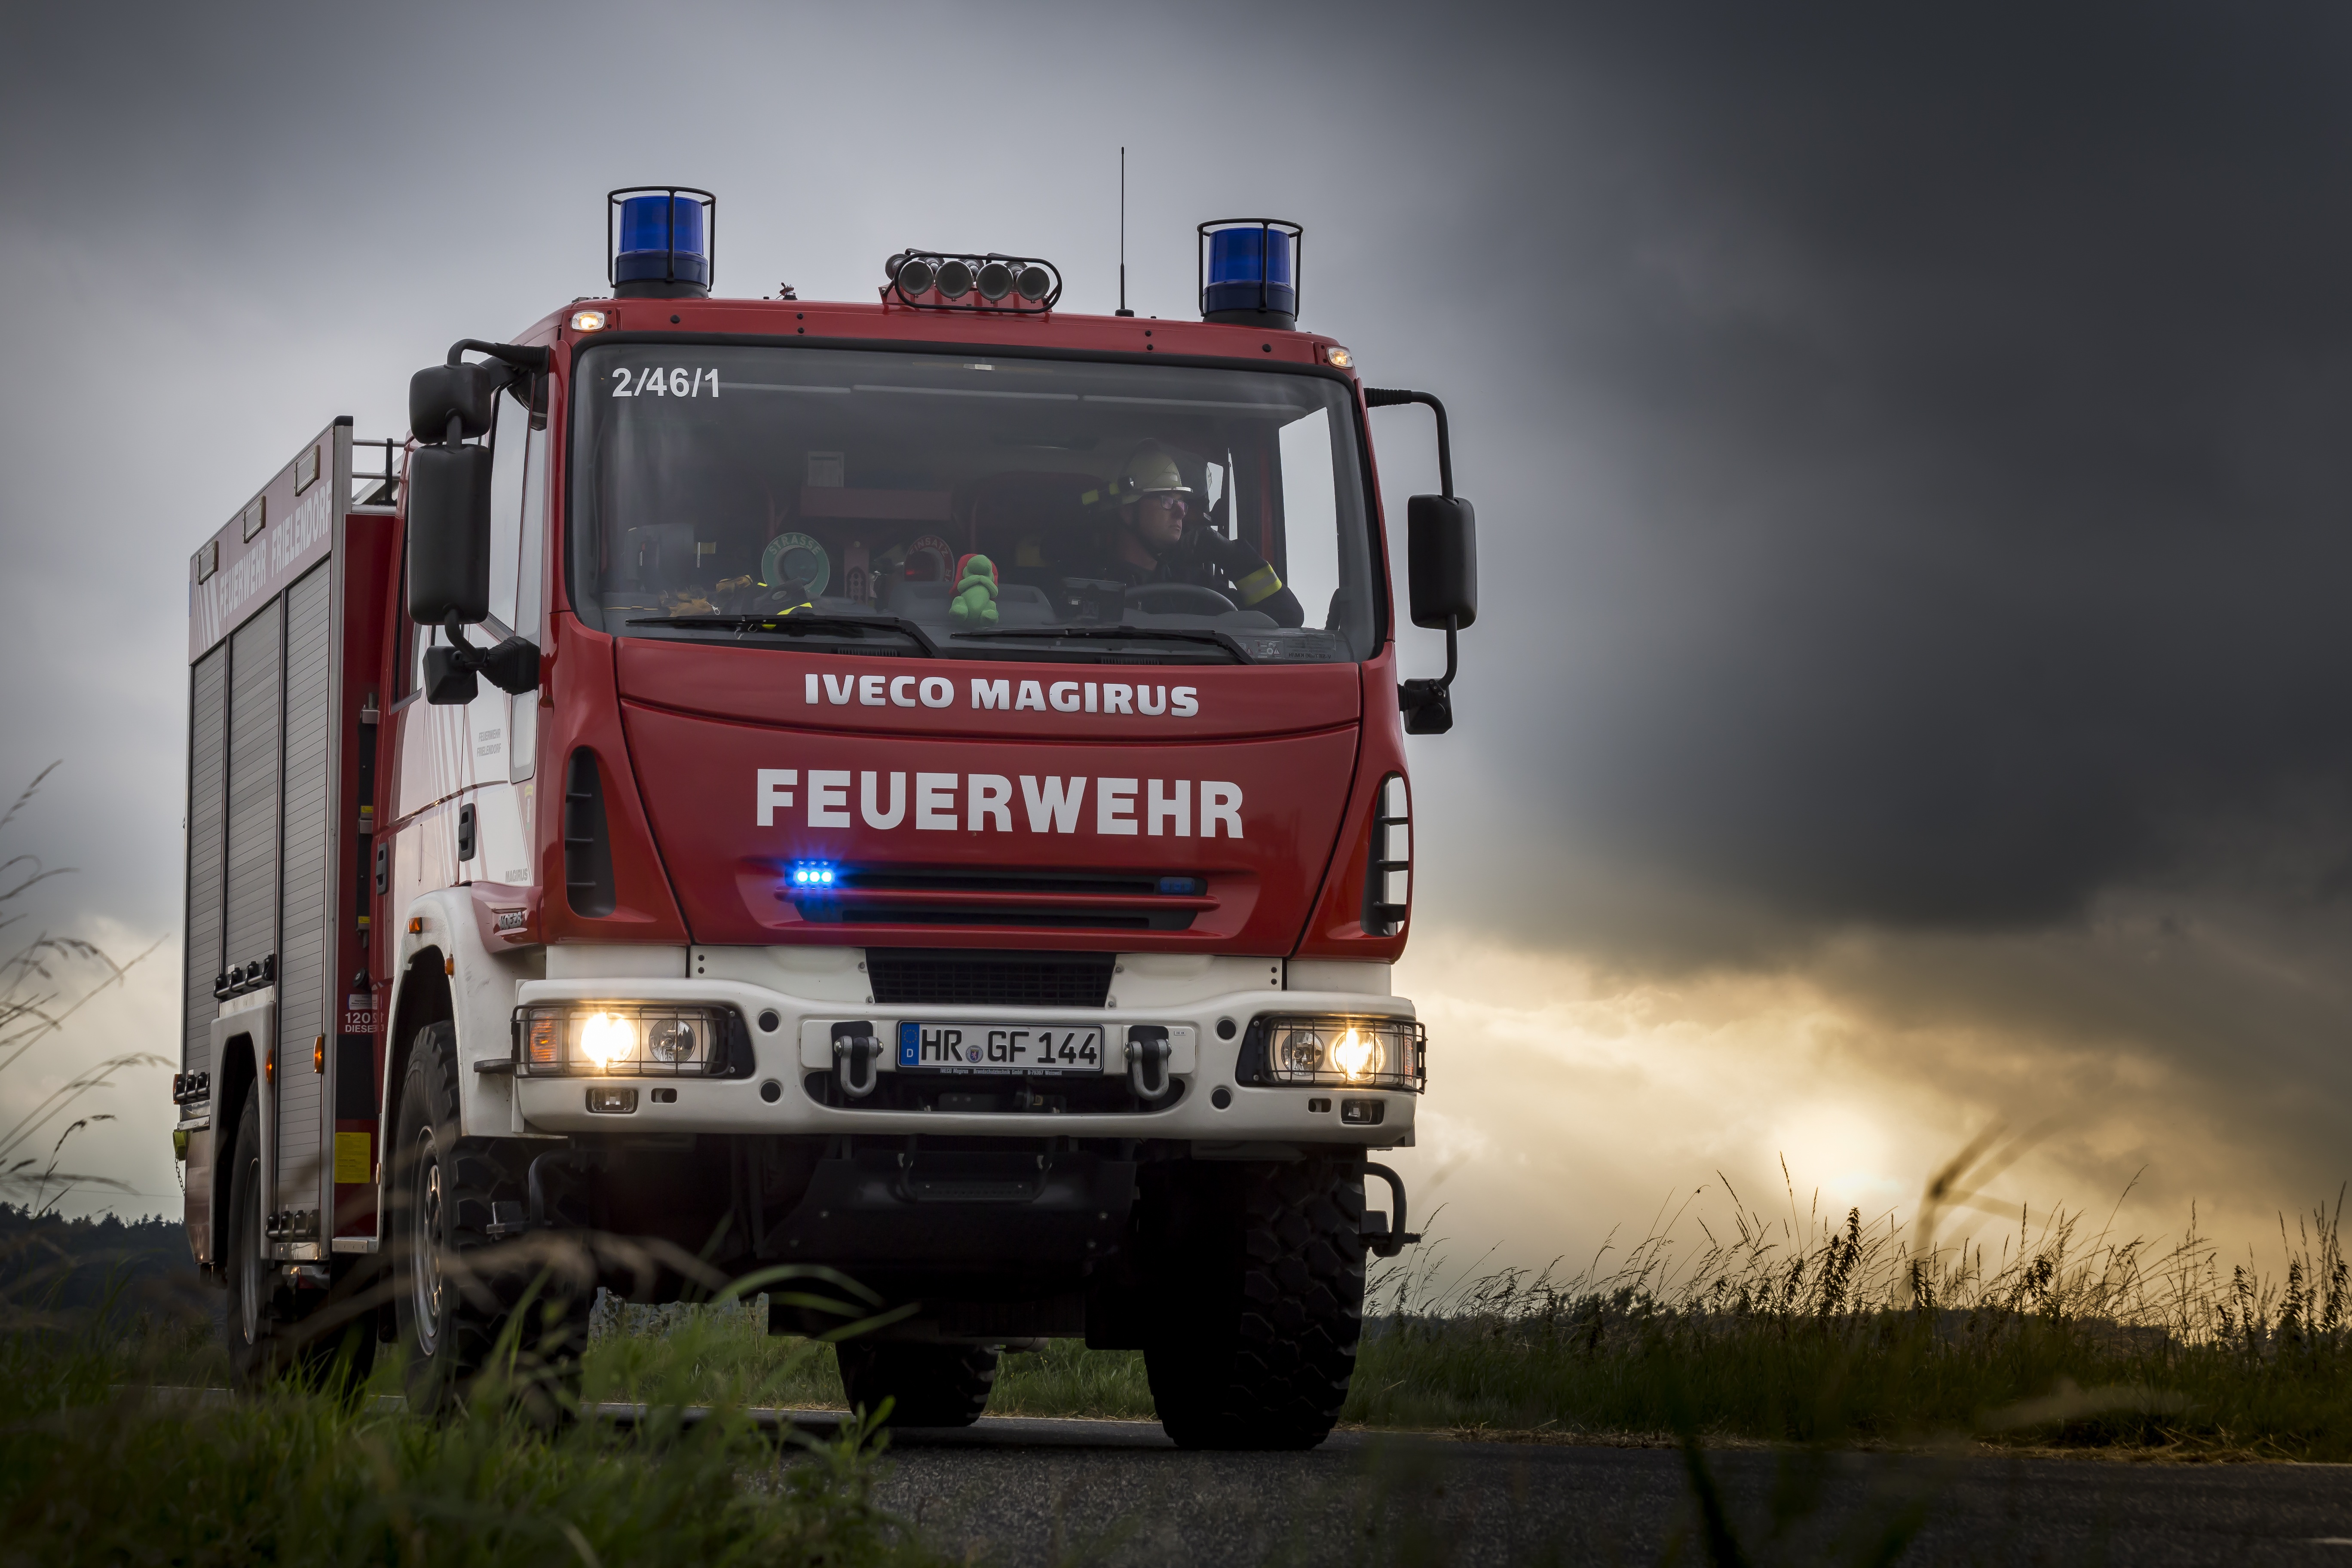 vehicles, fire truck, fire engine, firefighter, iveco